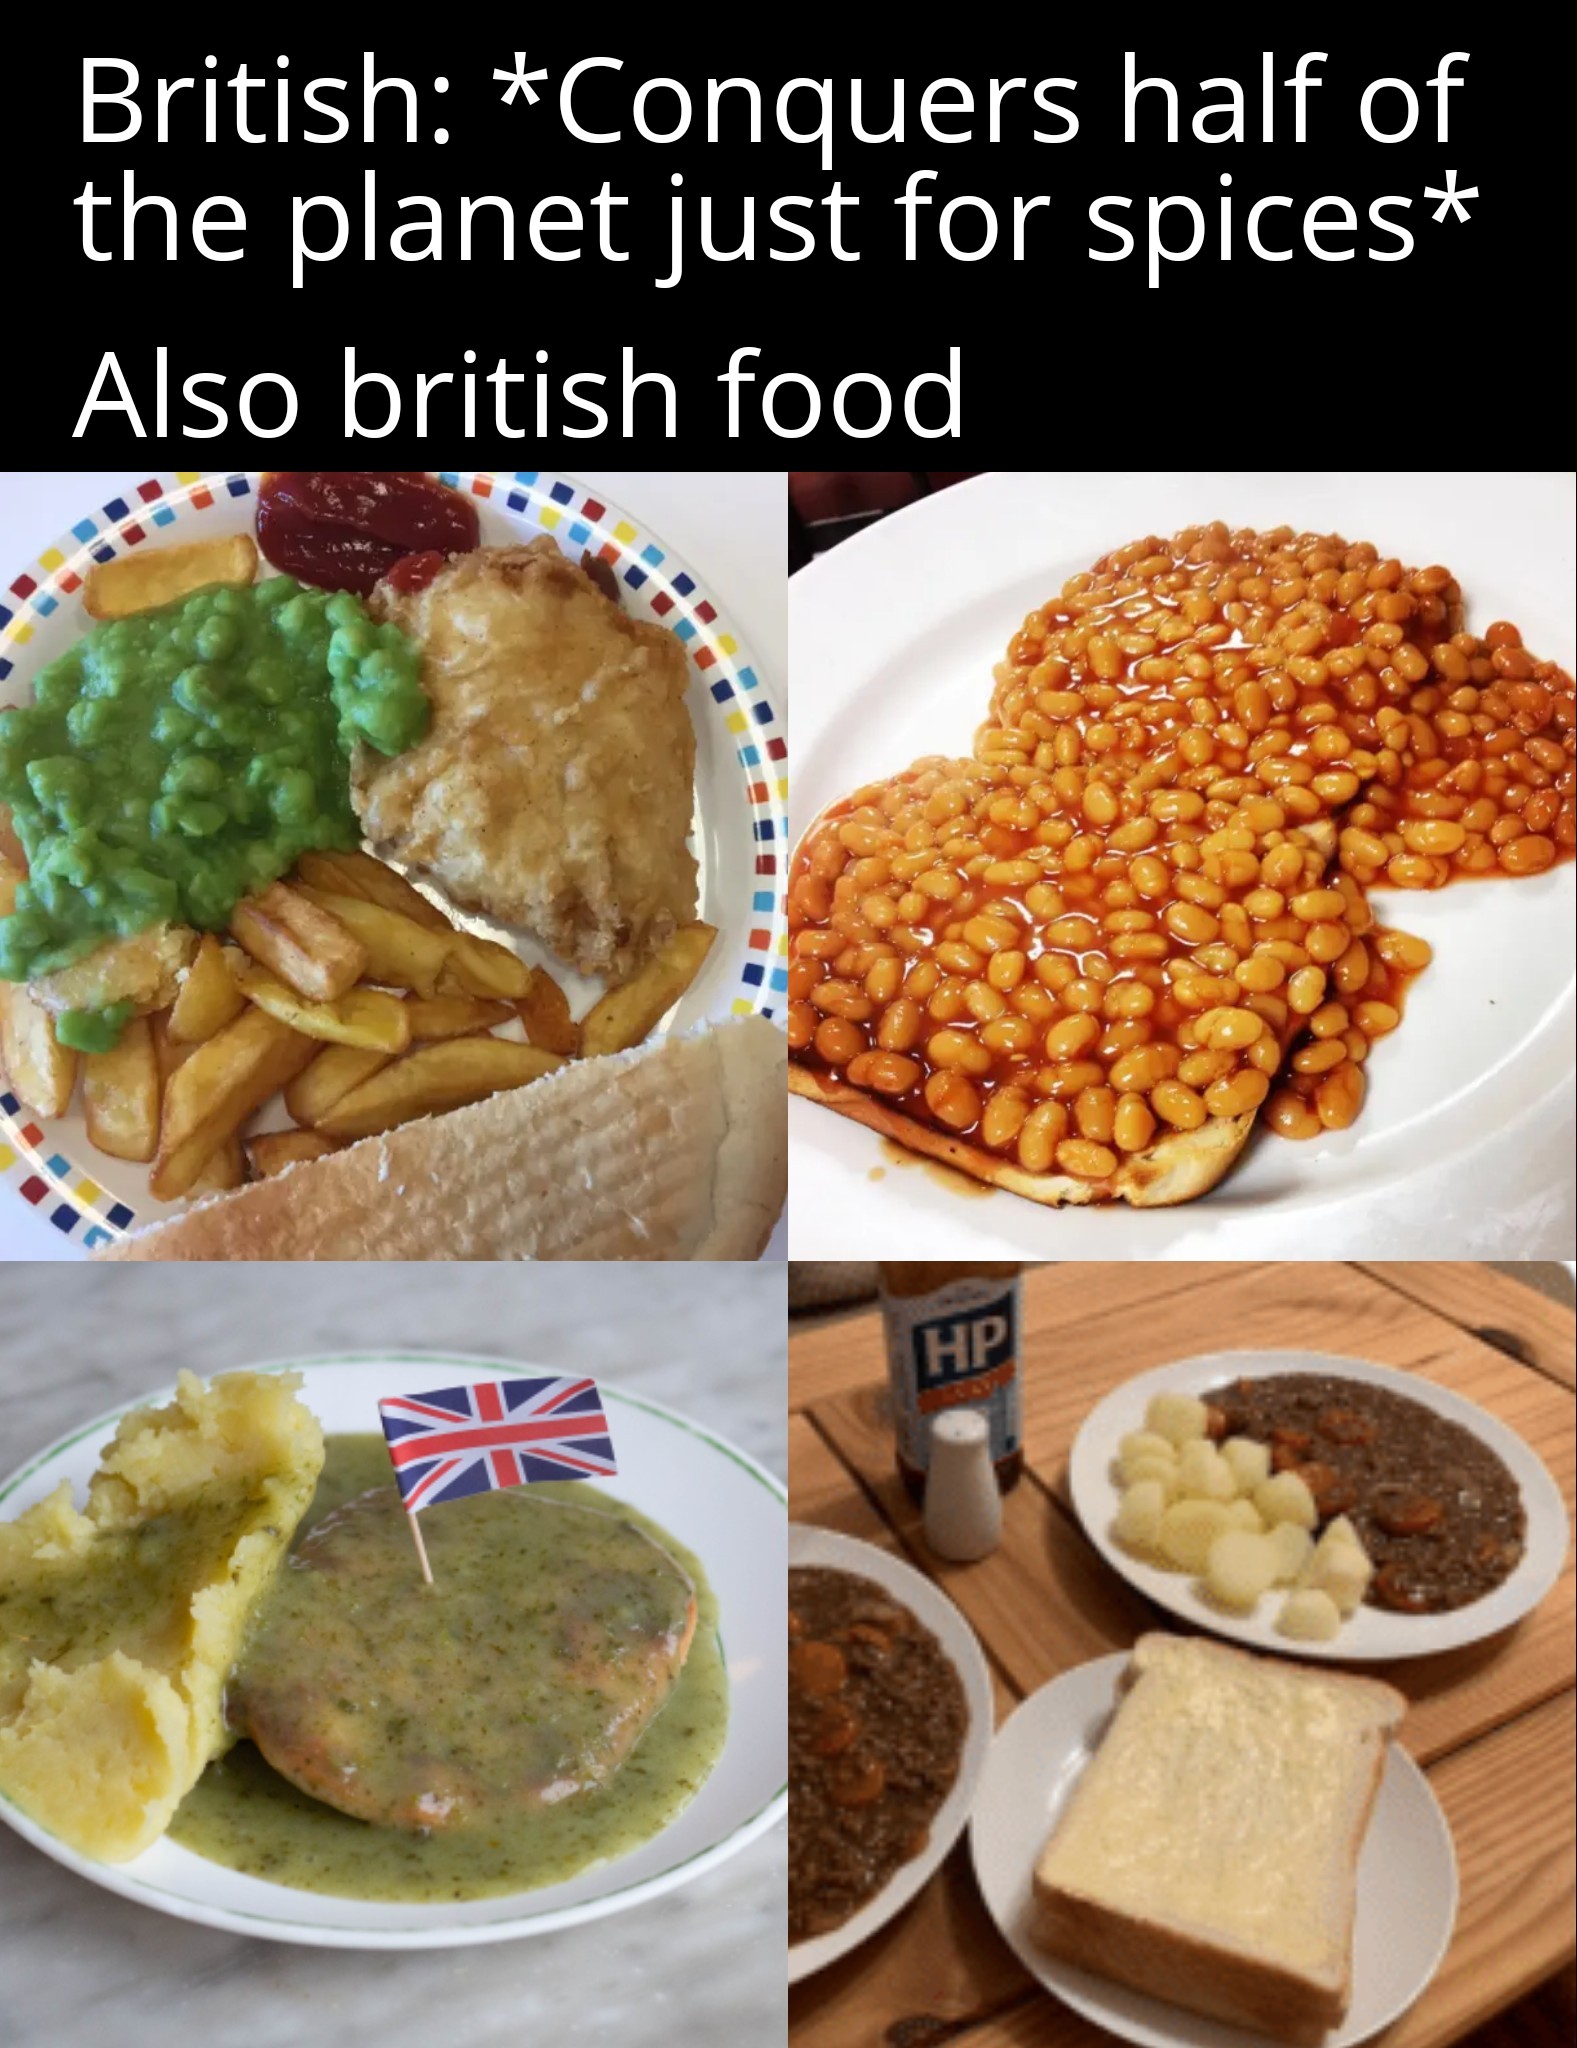 dank memes - promise you - British Conquers half of the planet just for spices Also british food Hp